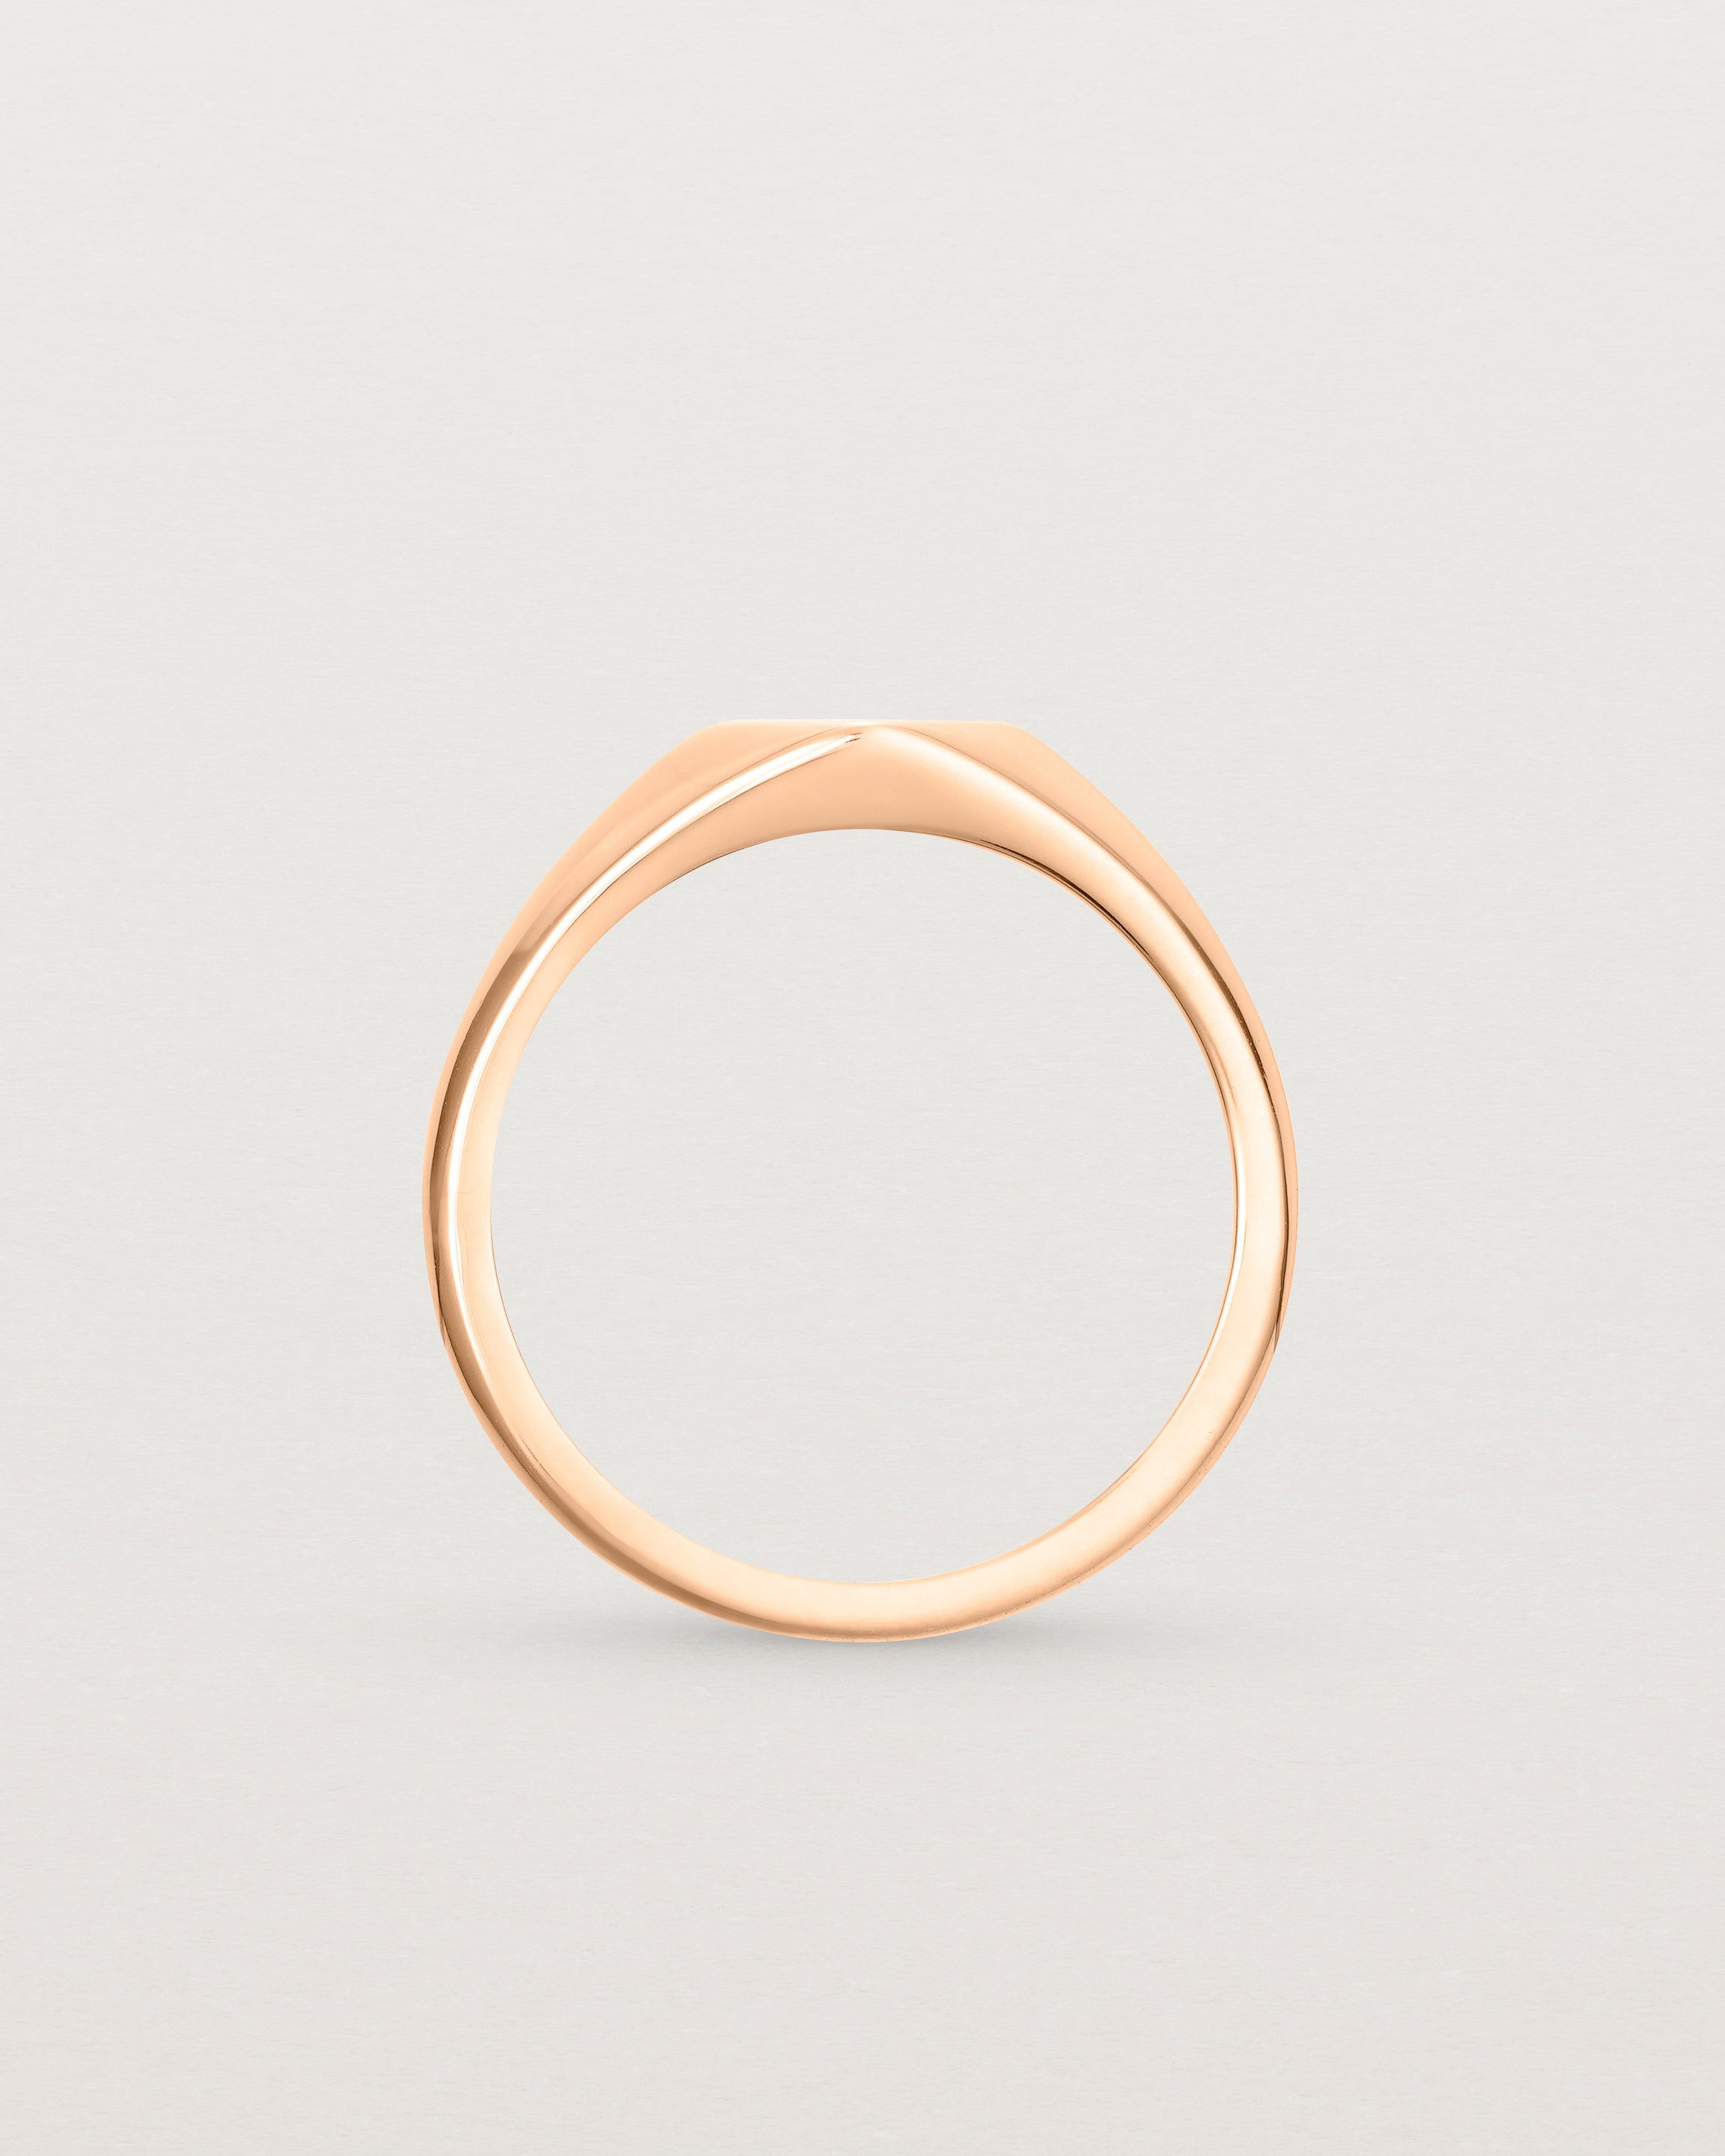 Standing view of the Nuna Signet Ring | Rose Gold.